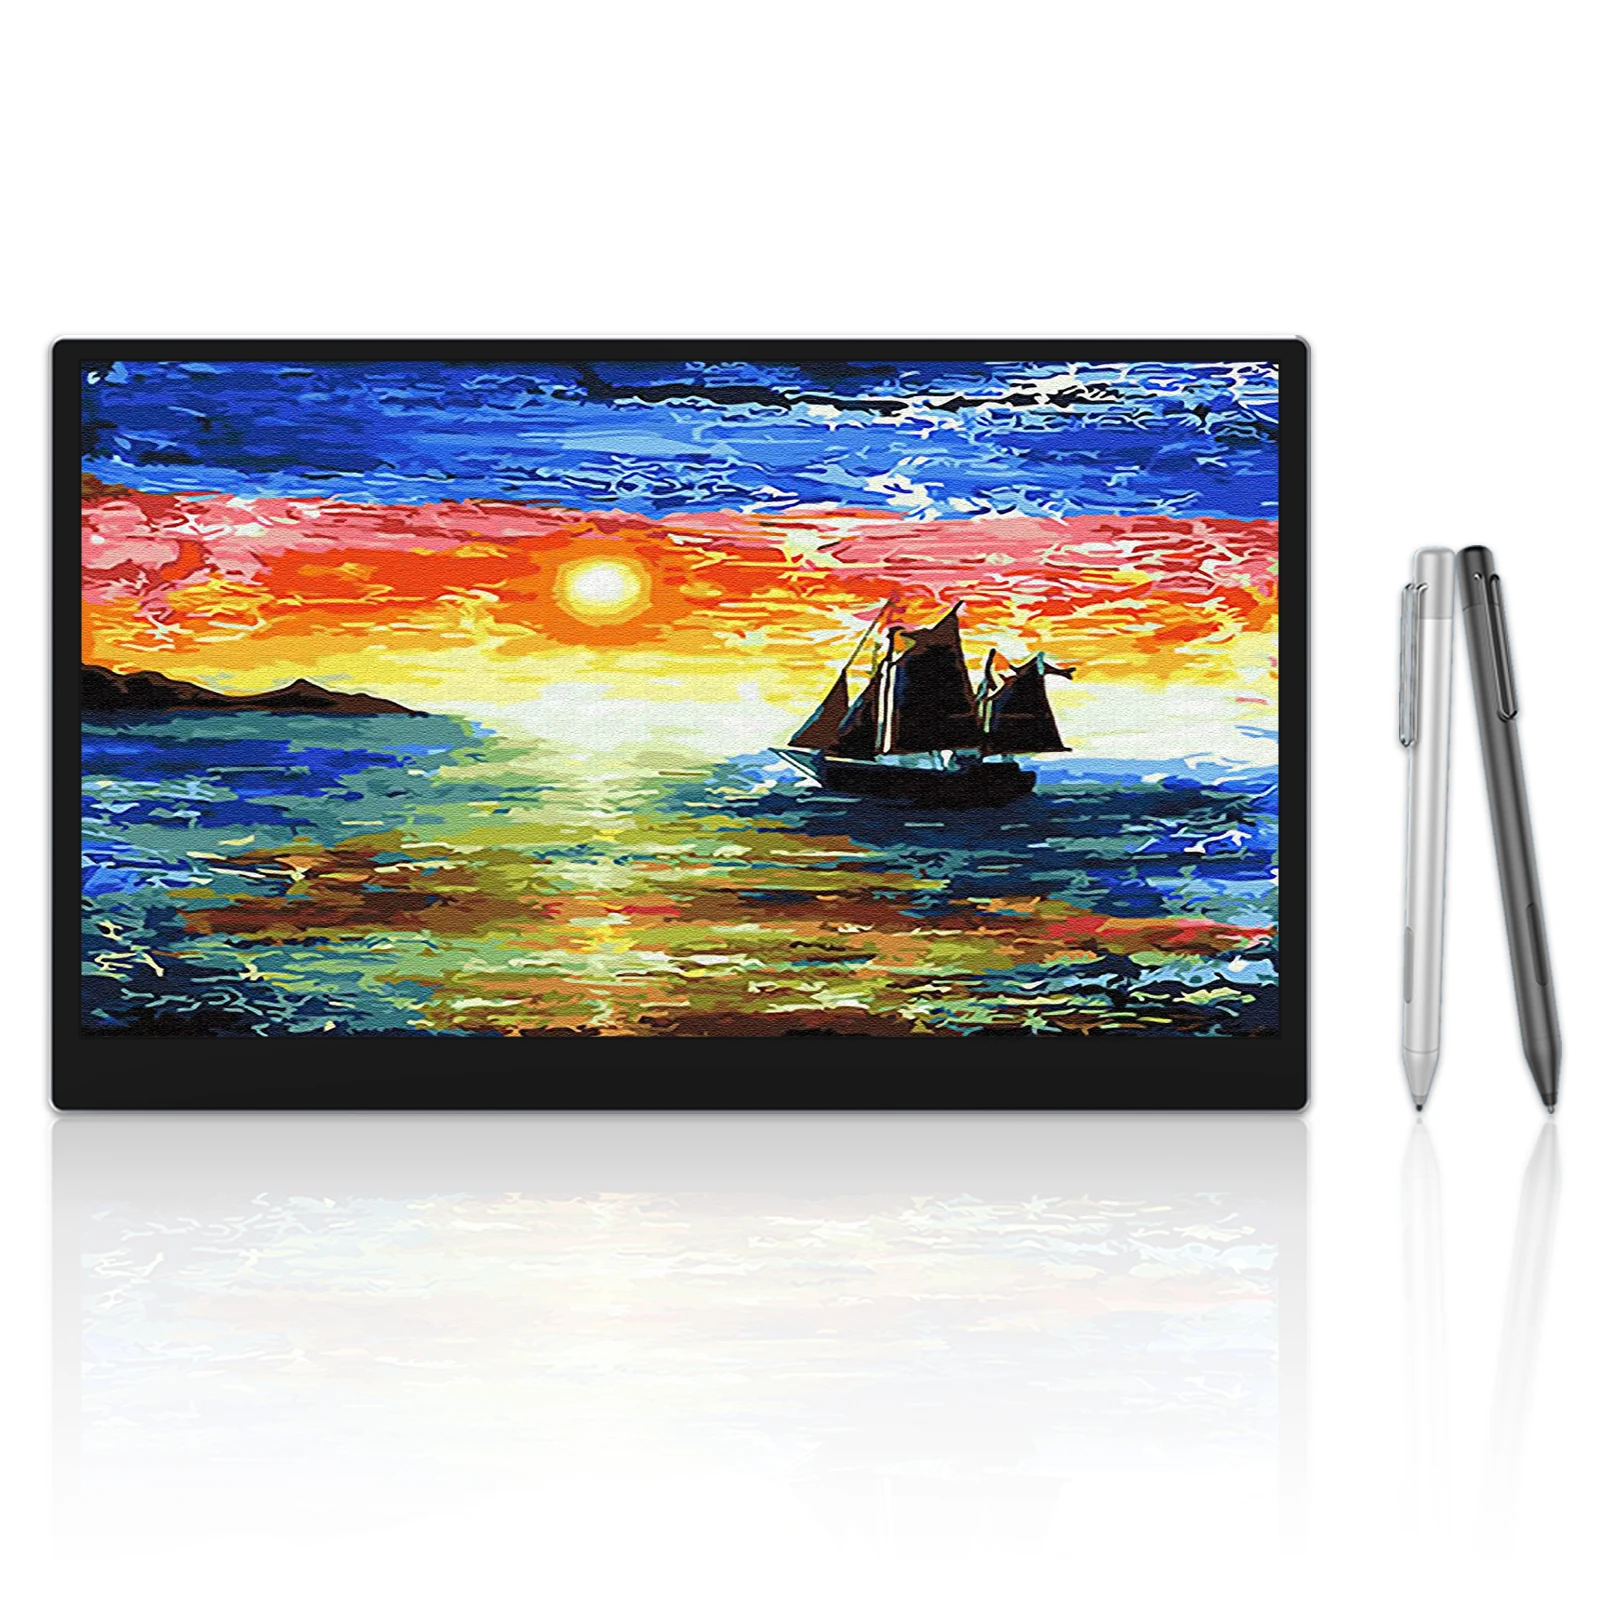 

Drop Shipping Pen Display 13.3 Inch Portable Graphics Drawing monitar with 10-point Touch Screen and MPP Tilt Stylus